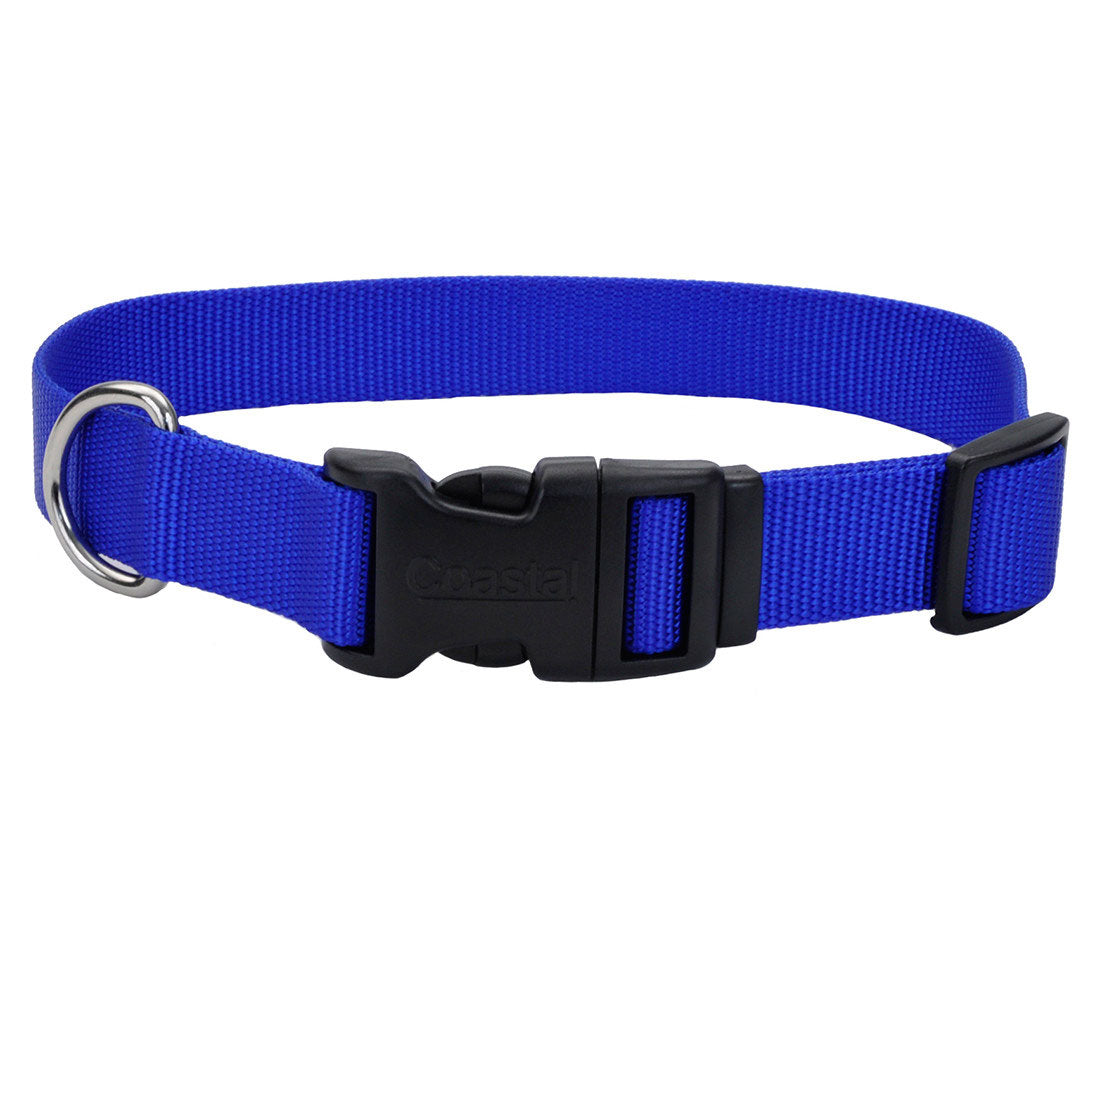 Coastal Adjustable Dog Collar with Plastic Buckle, Blue - 3/4In x 14 - 20In